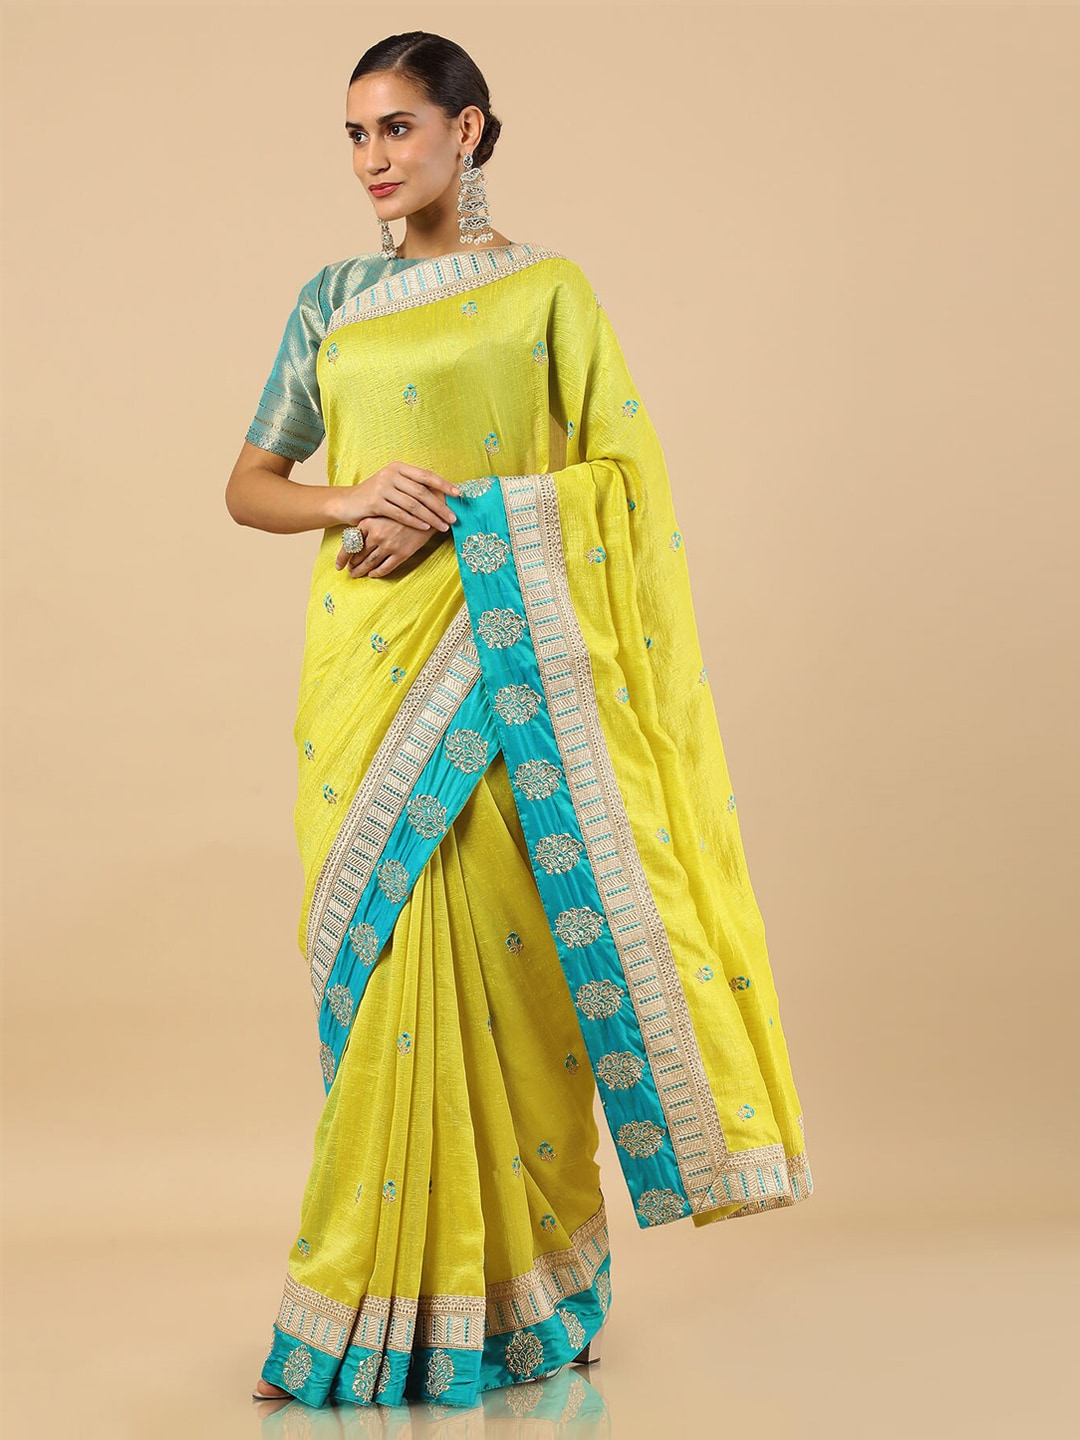 Soch Light Green Embroidered Tussar Saree Price in India